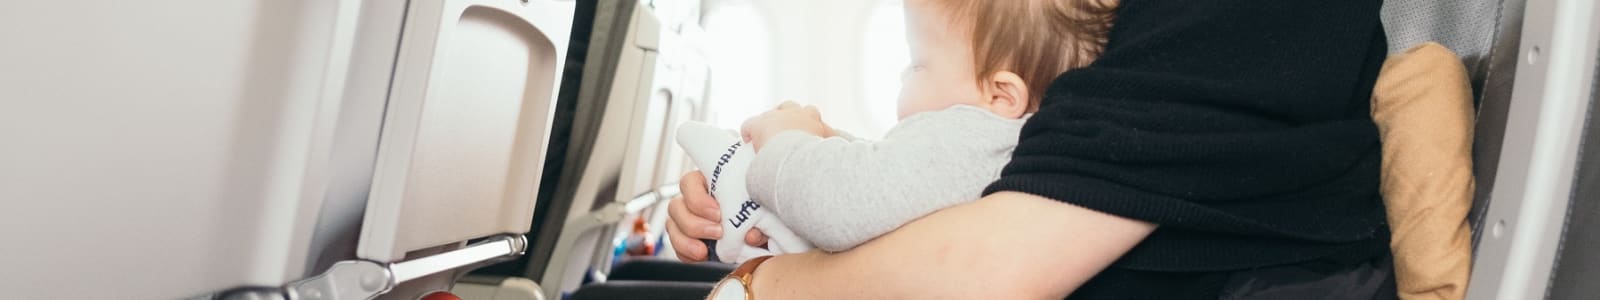 Baby on airline flight